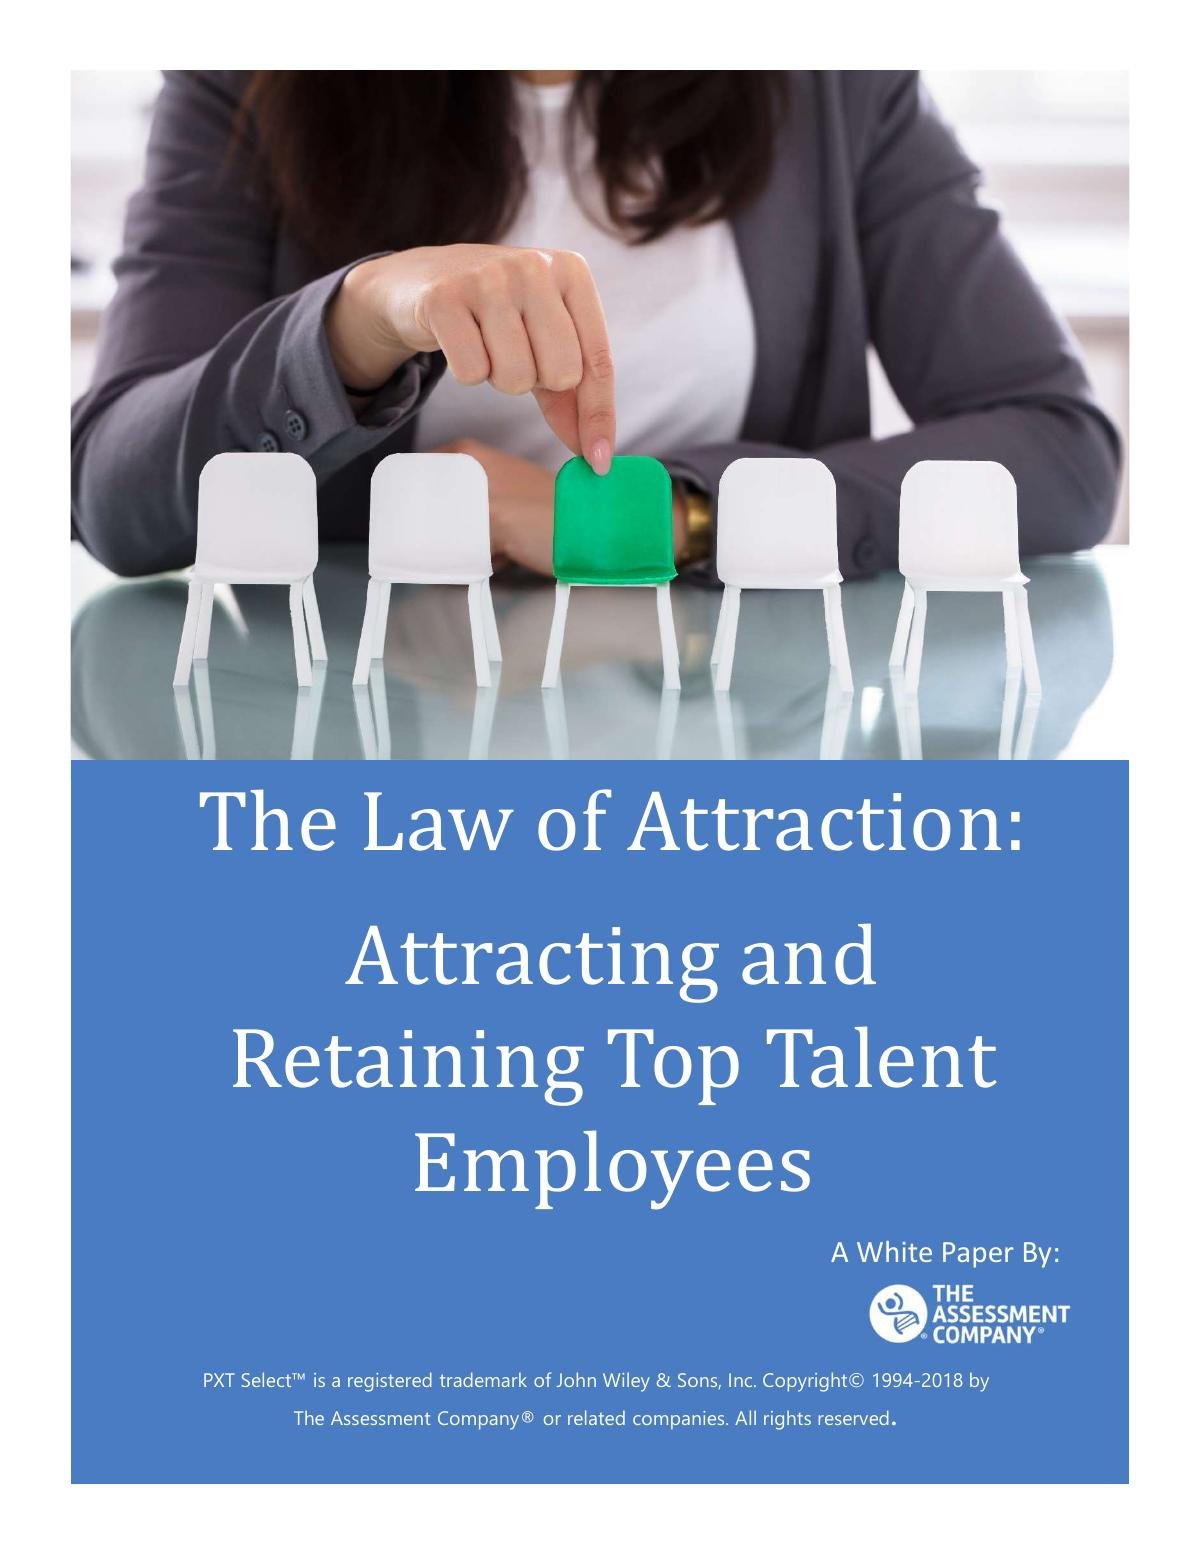 The Law of Attraction: Attracting and Retaining Top Talent Employees